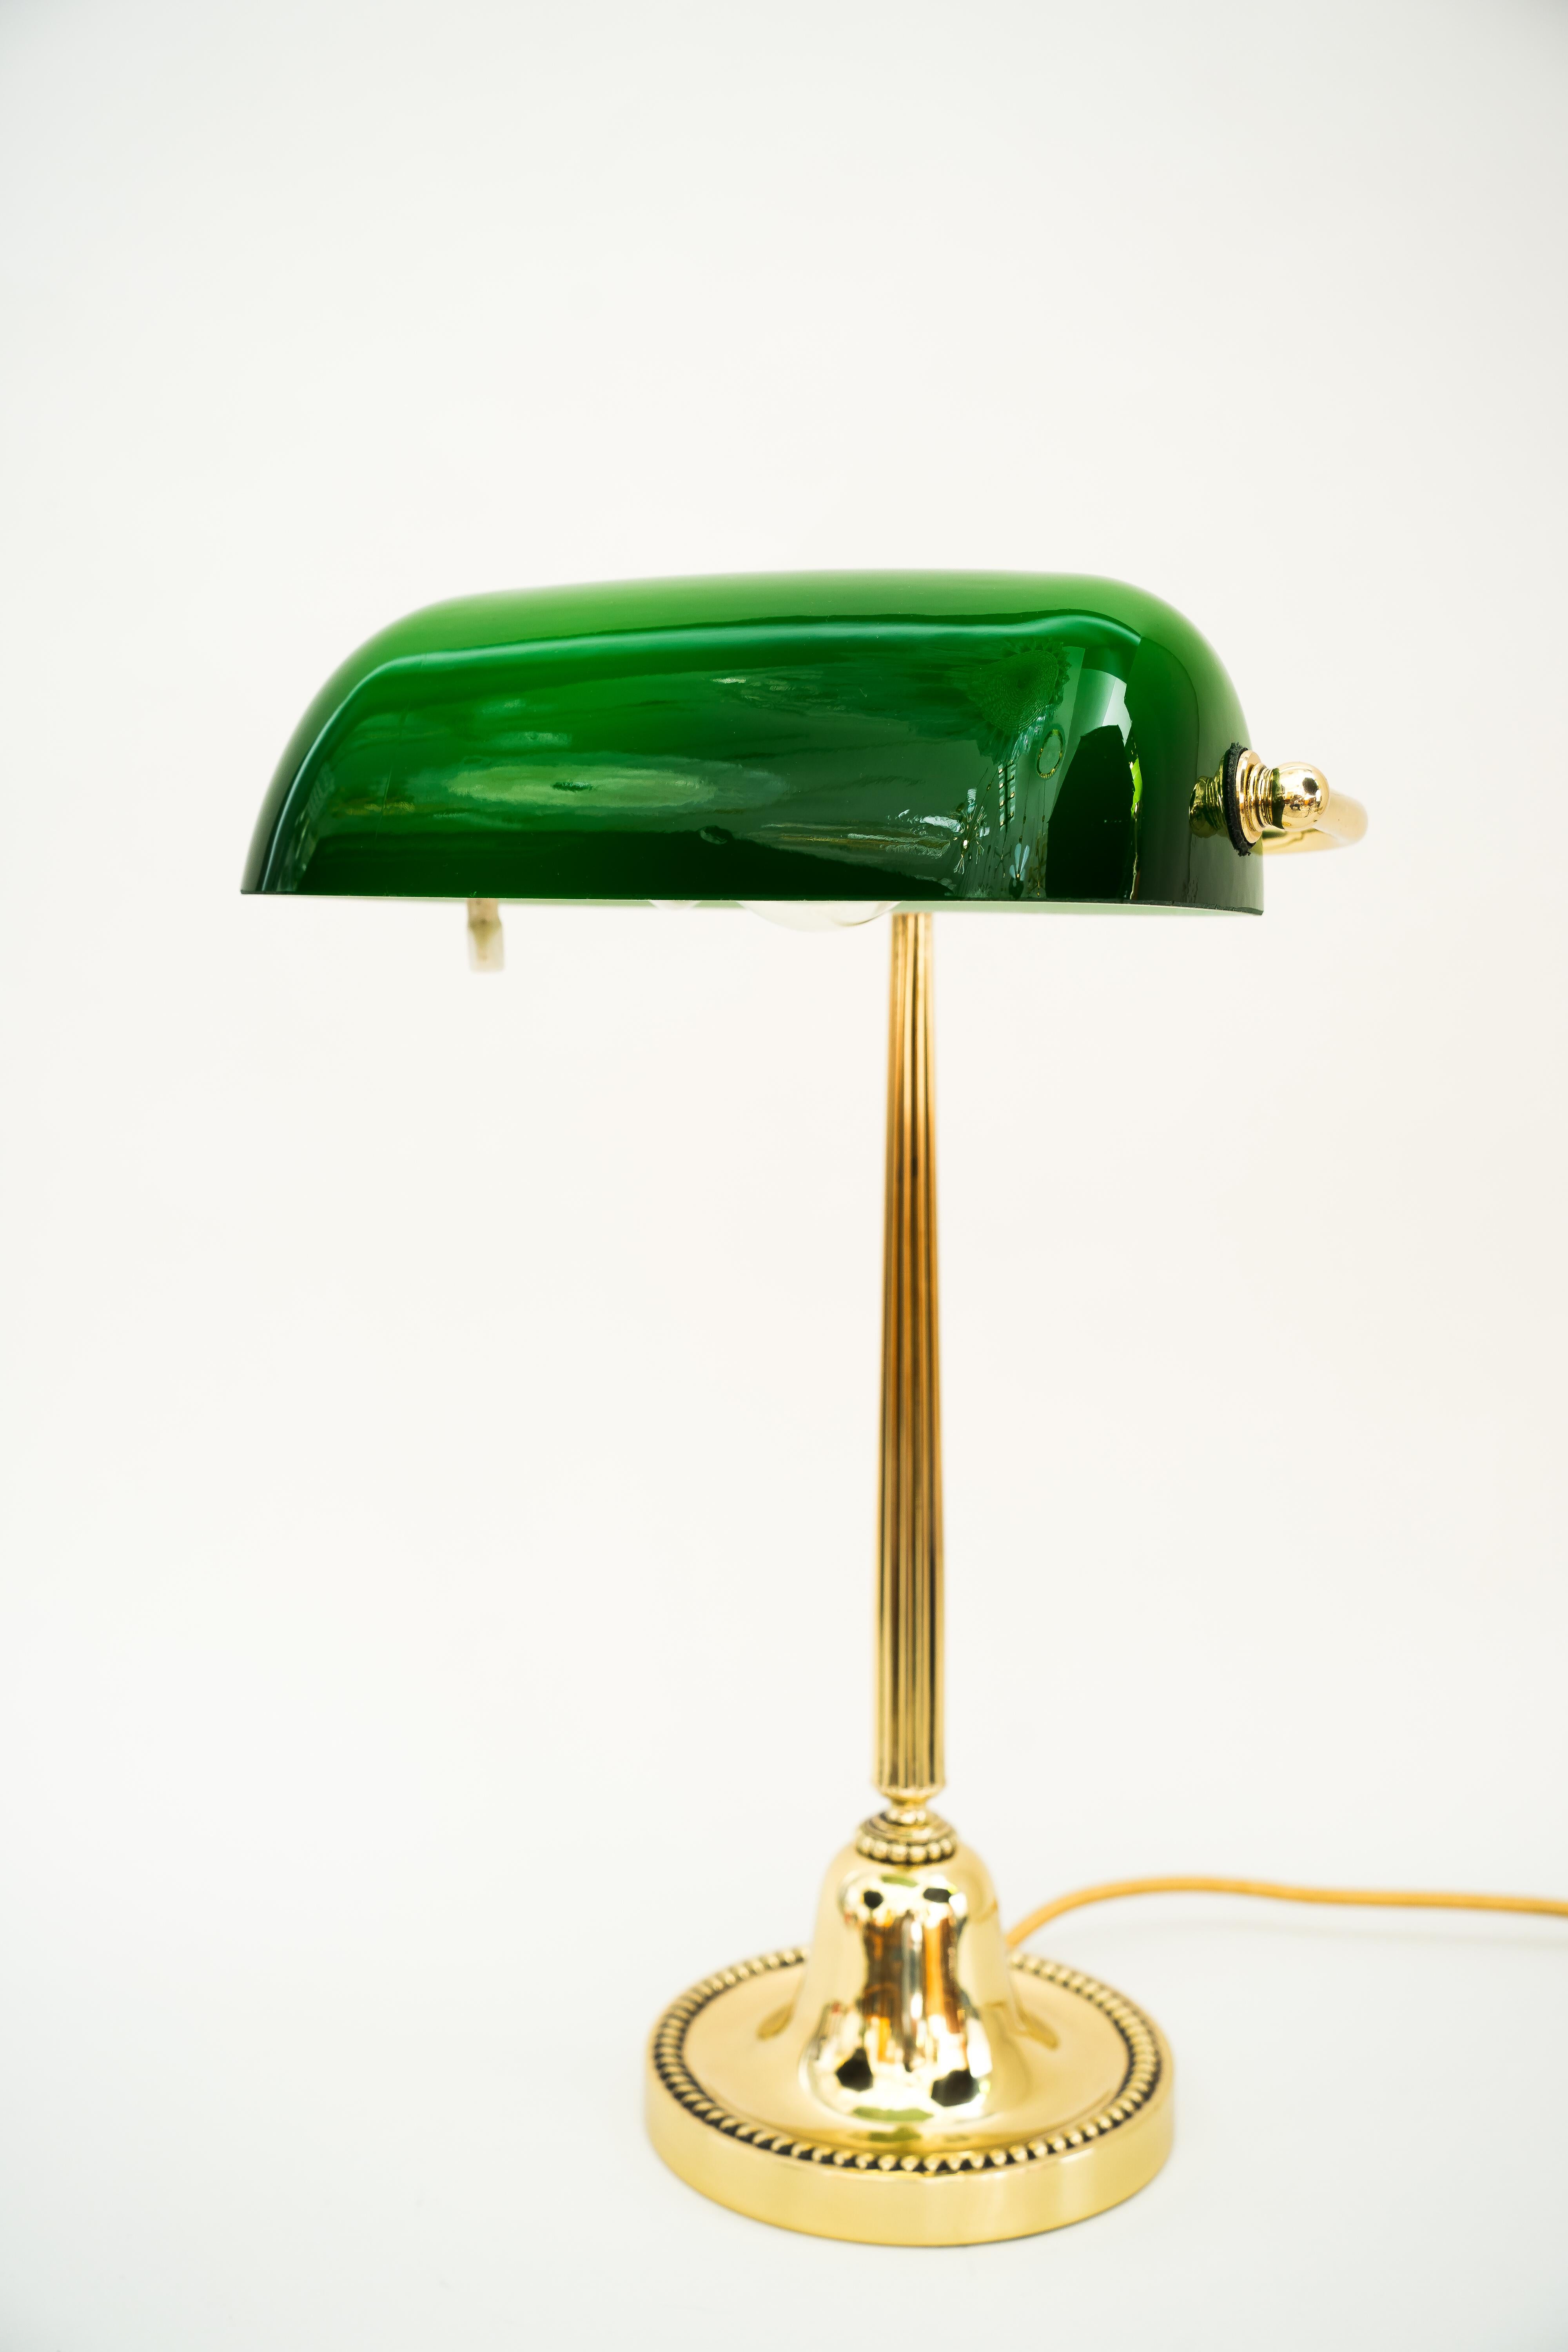 Art deco banker lamp vienna 1920s
Brass polished and stove enamelled
Green glass shade.